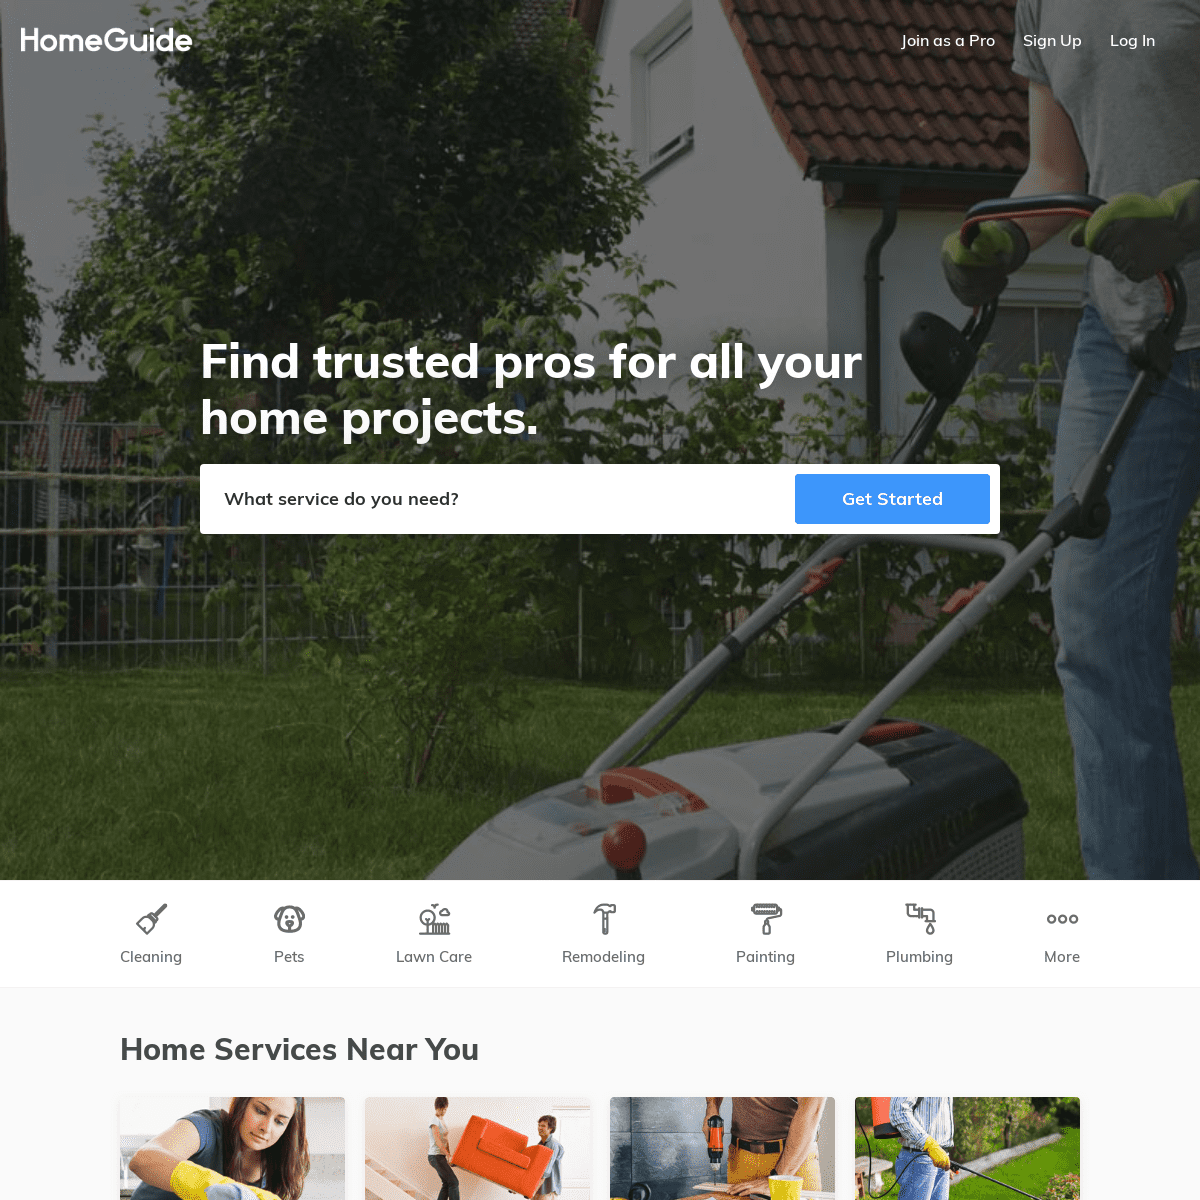 Find Trusted Painters, Plumbers, Maids and more! // HomeGuide